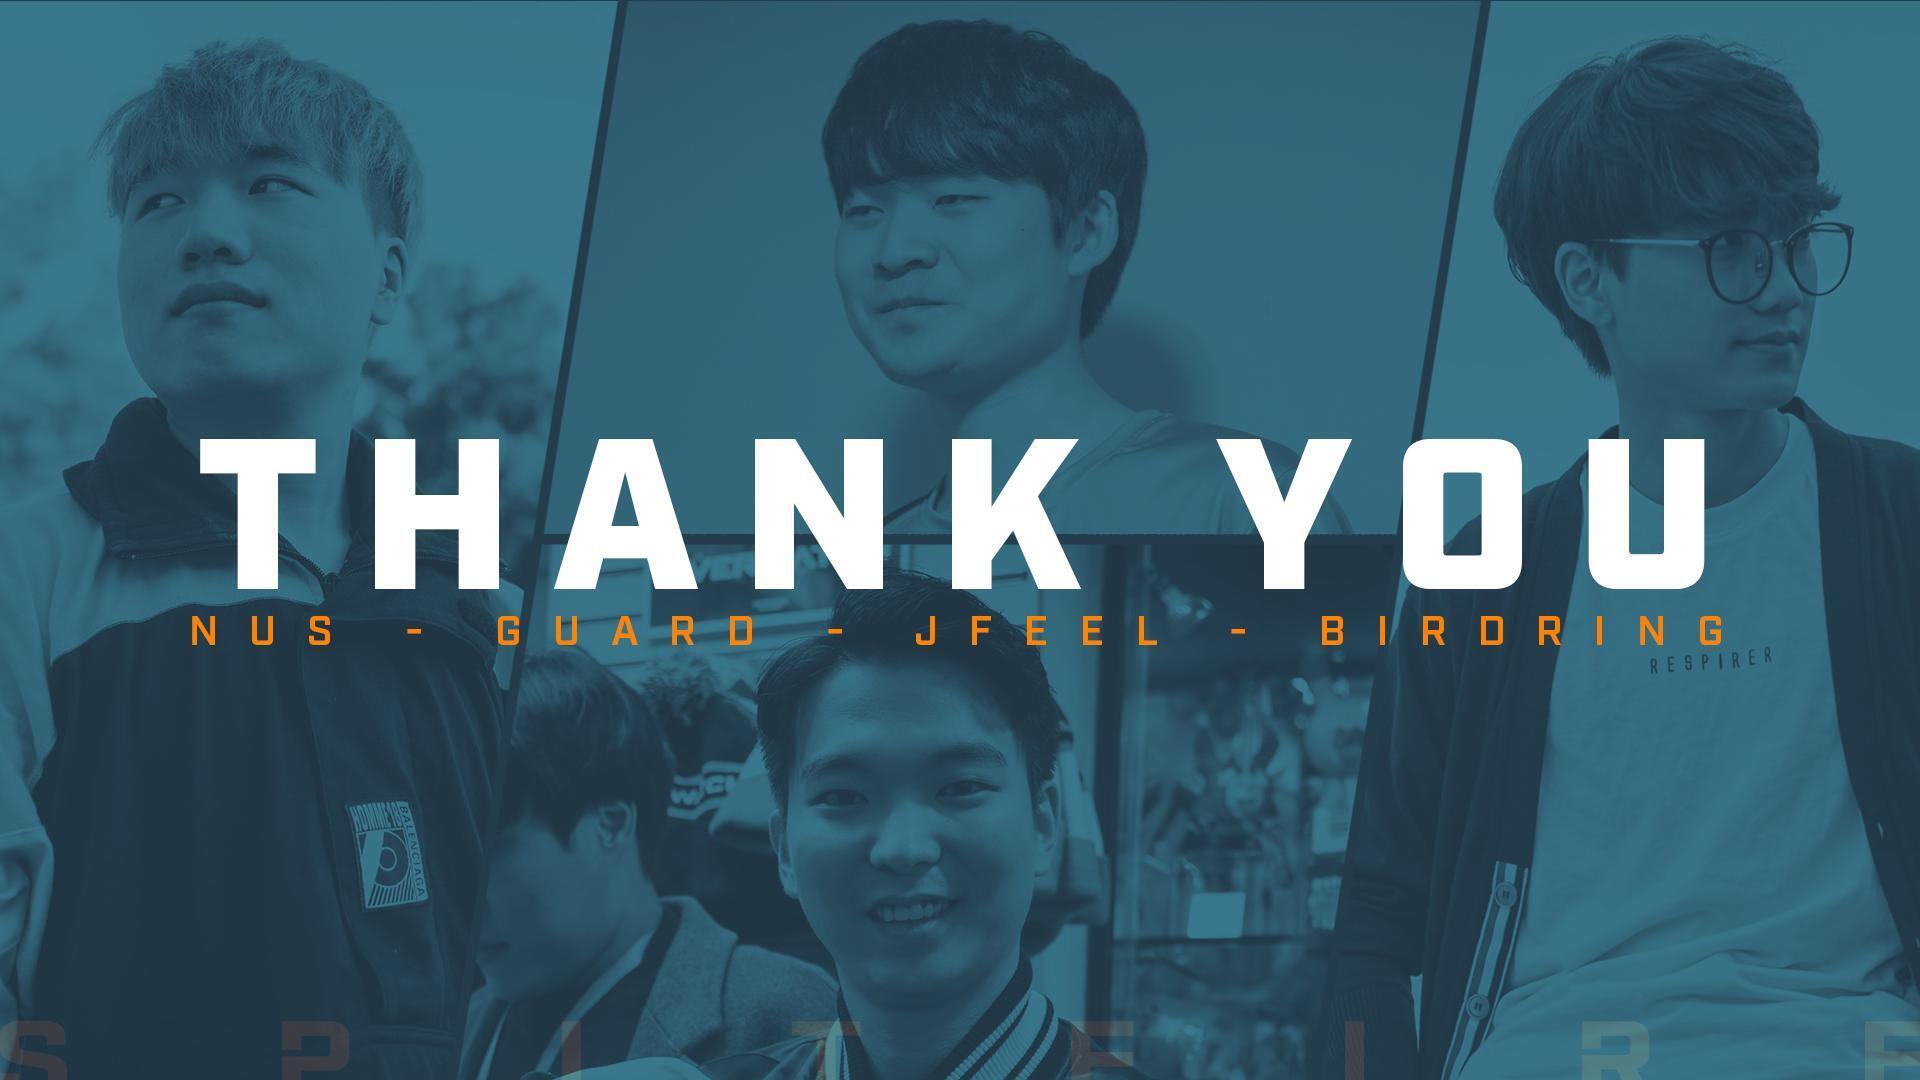 London spitfire release players birdring